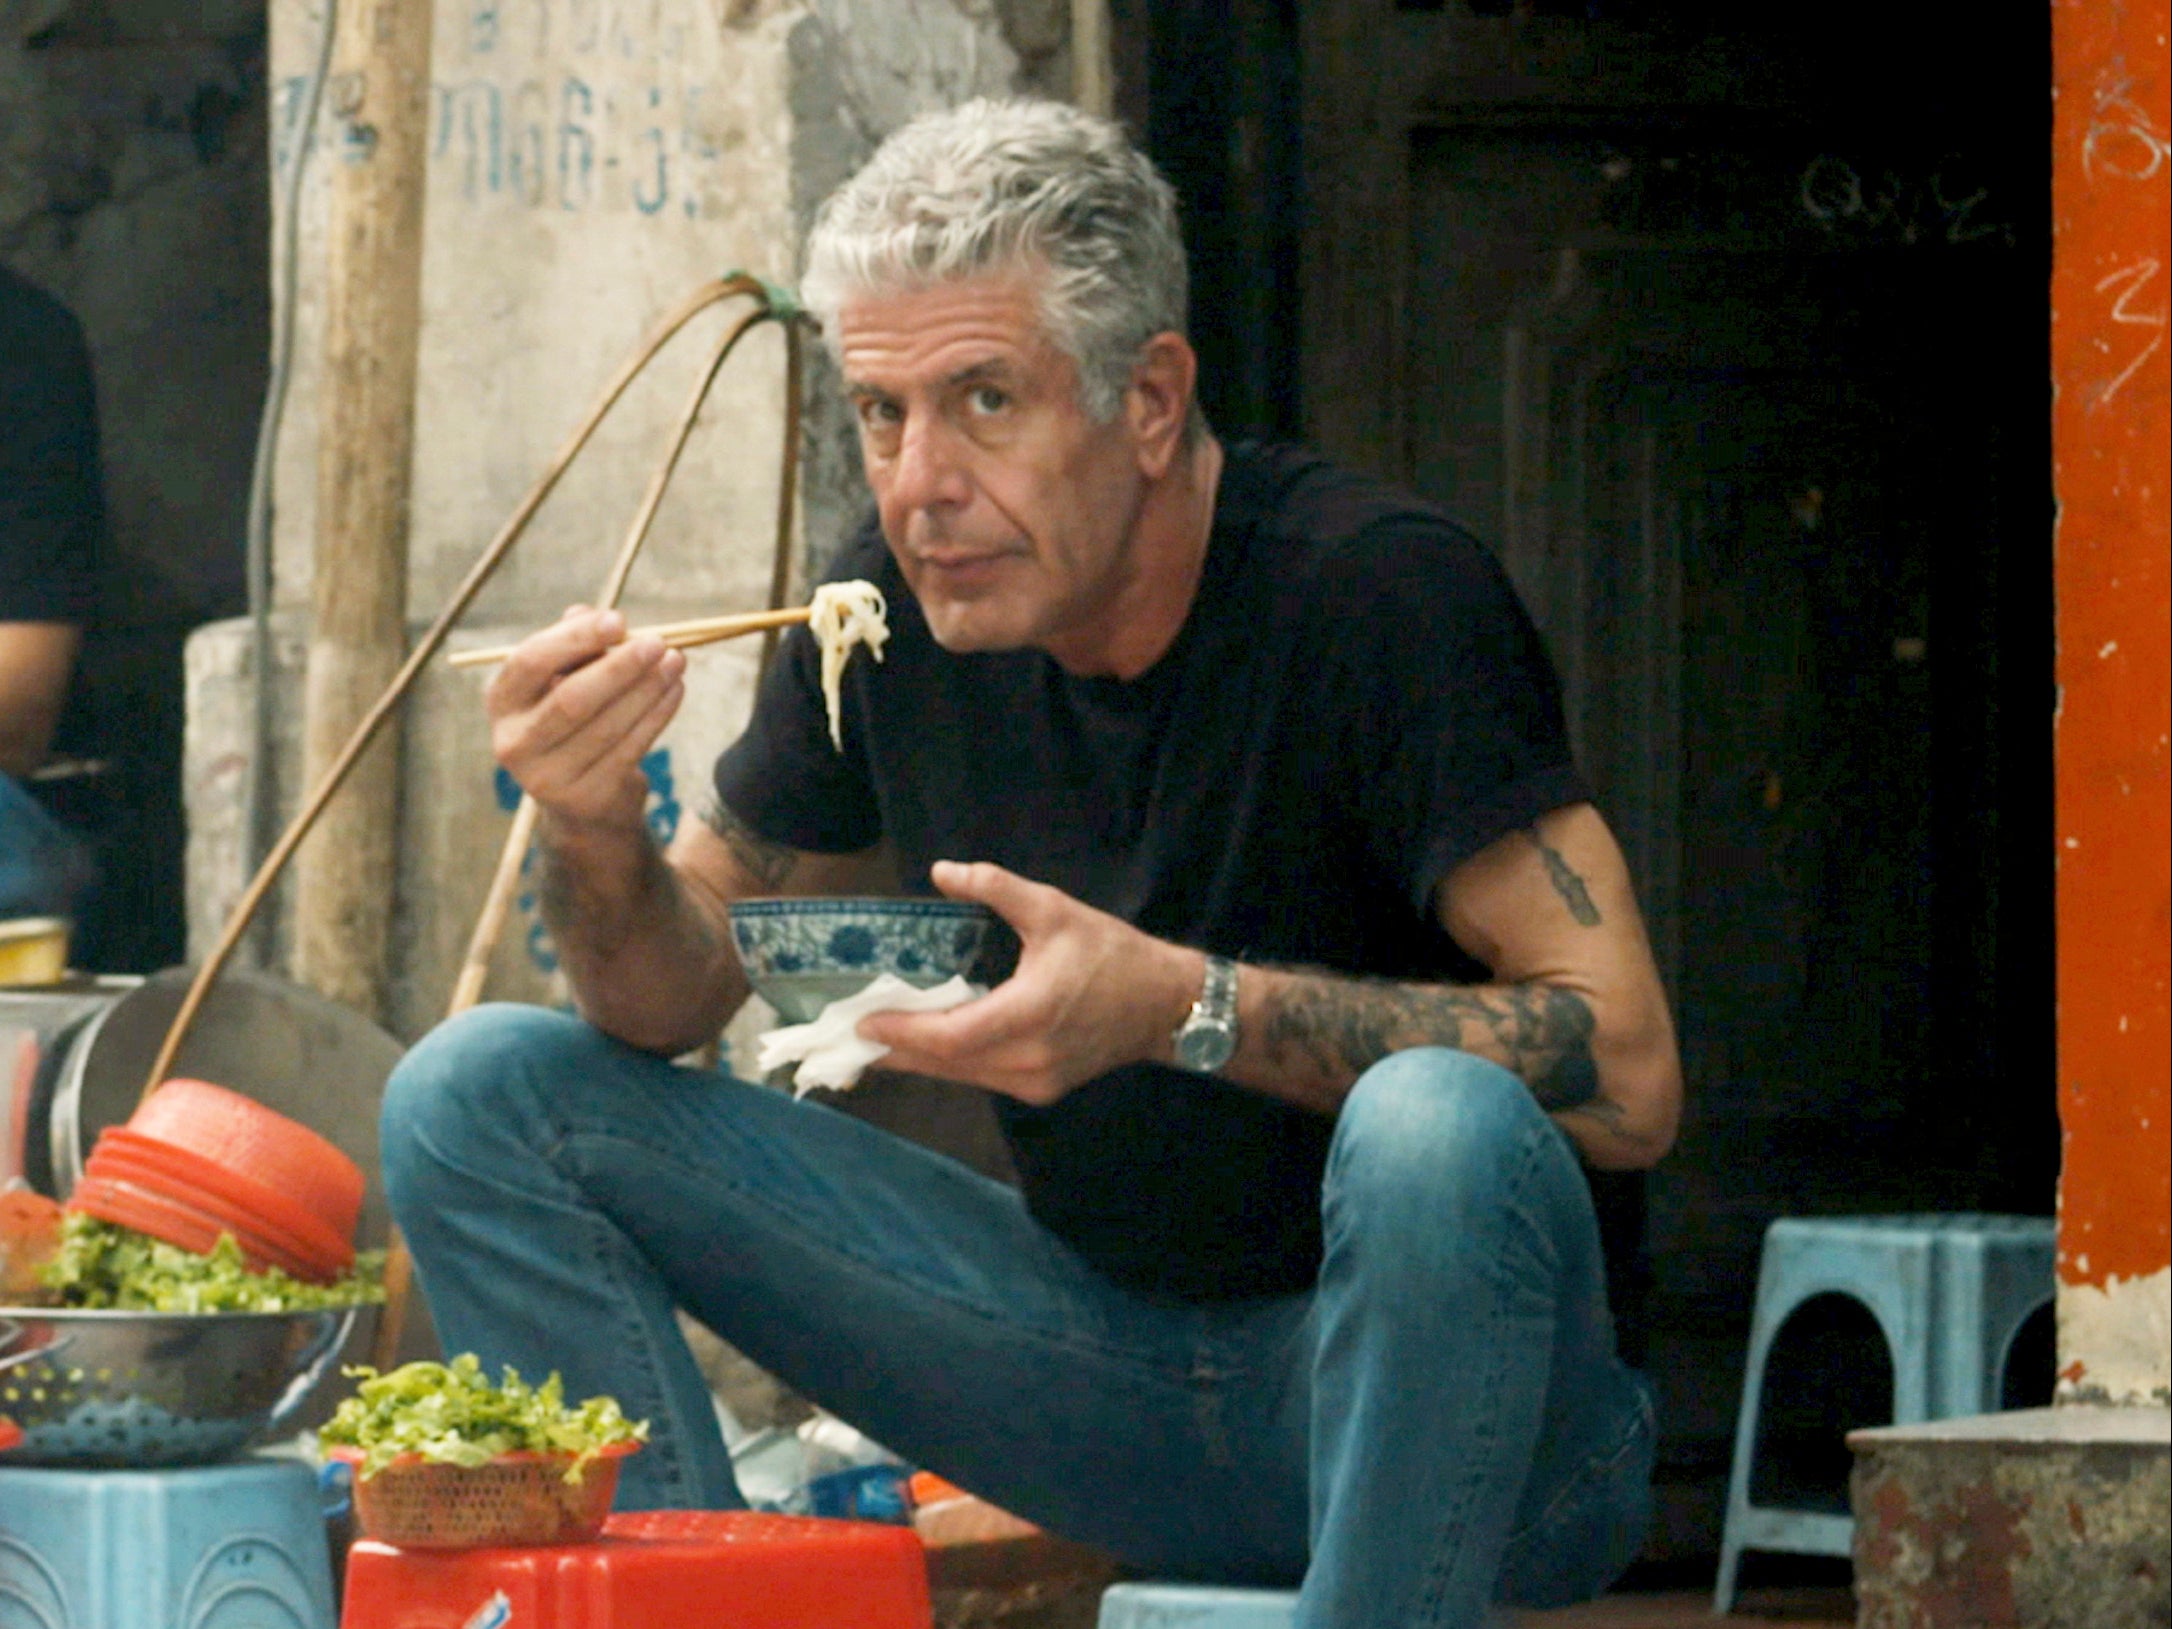 Late chef and travel host Anthony Bourdain, as seen in a promotional image for ‘Roadrunner: A Film About Anthony Bourdain'